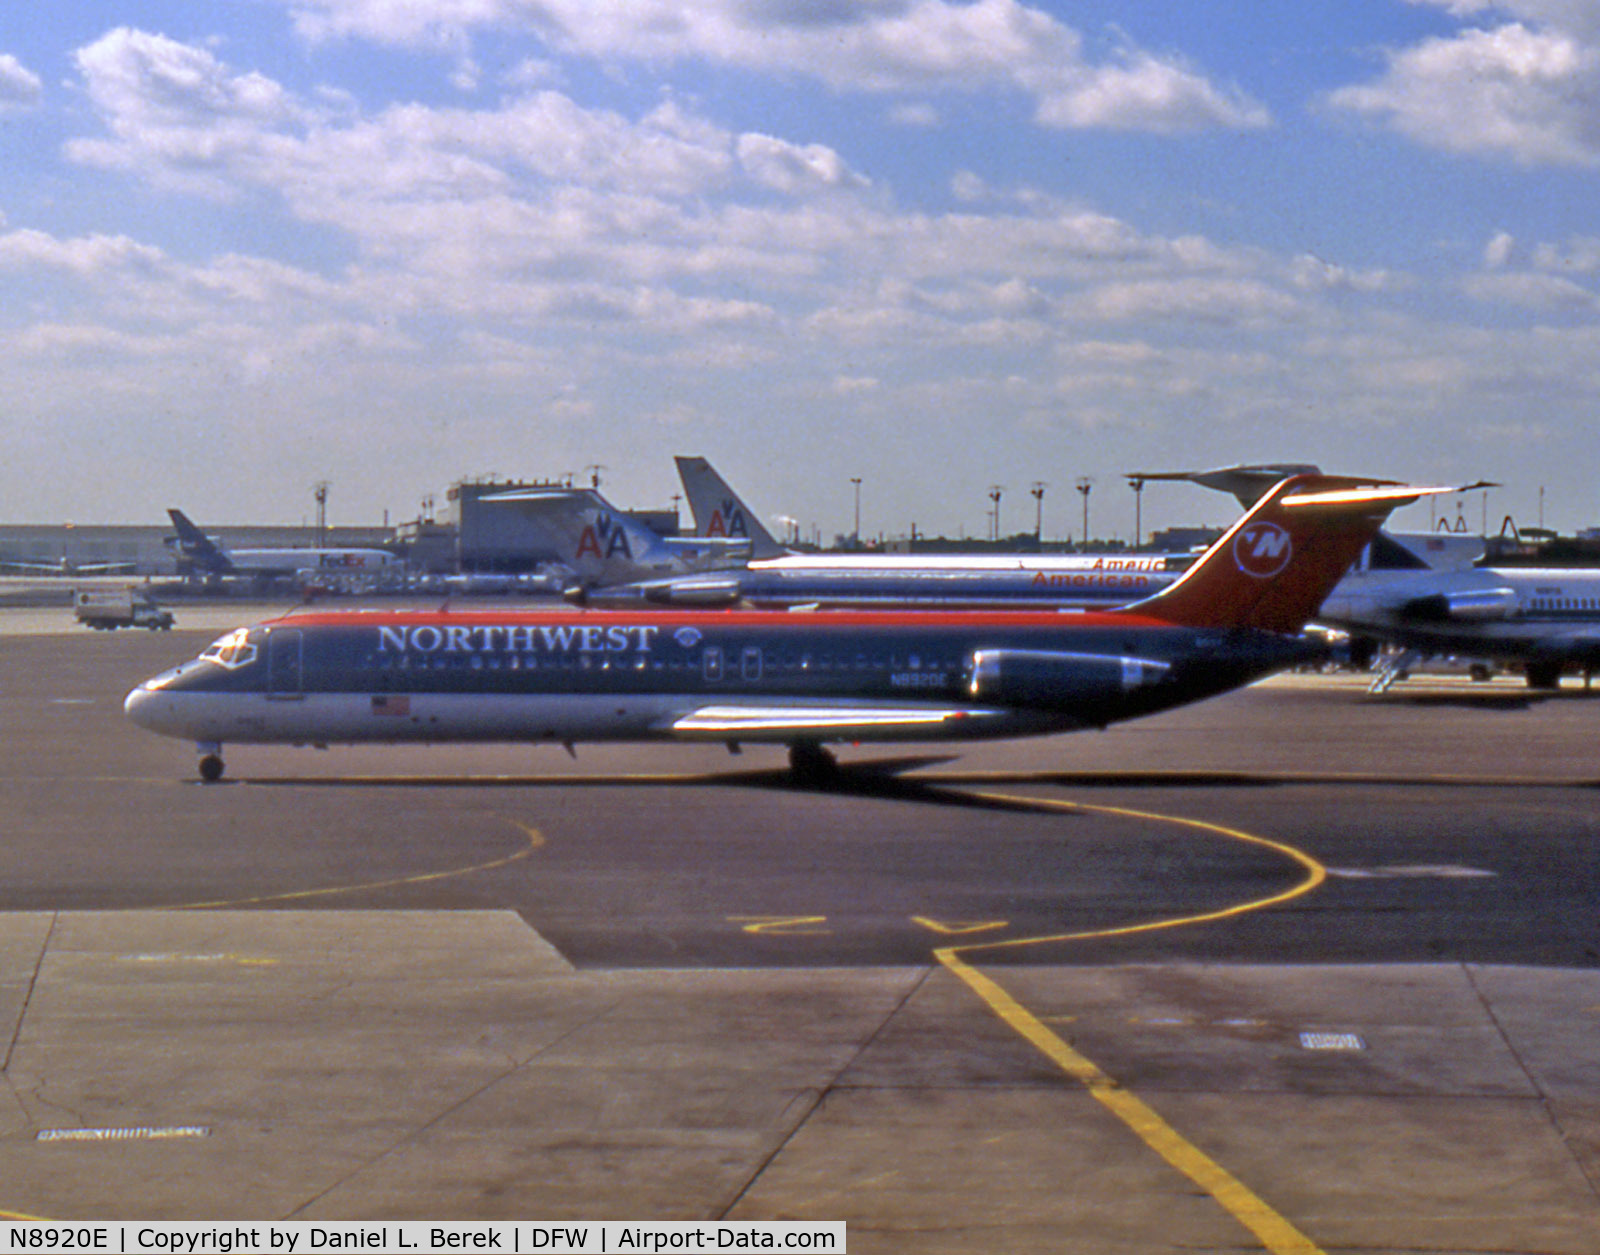 N8920E, 1967 Douglas DC-9-31 C/N 45835, Even 10 years after this photo was taken, in 1995, this old workhorse would be going strong.